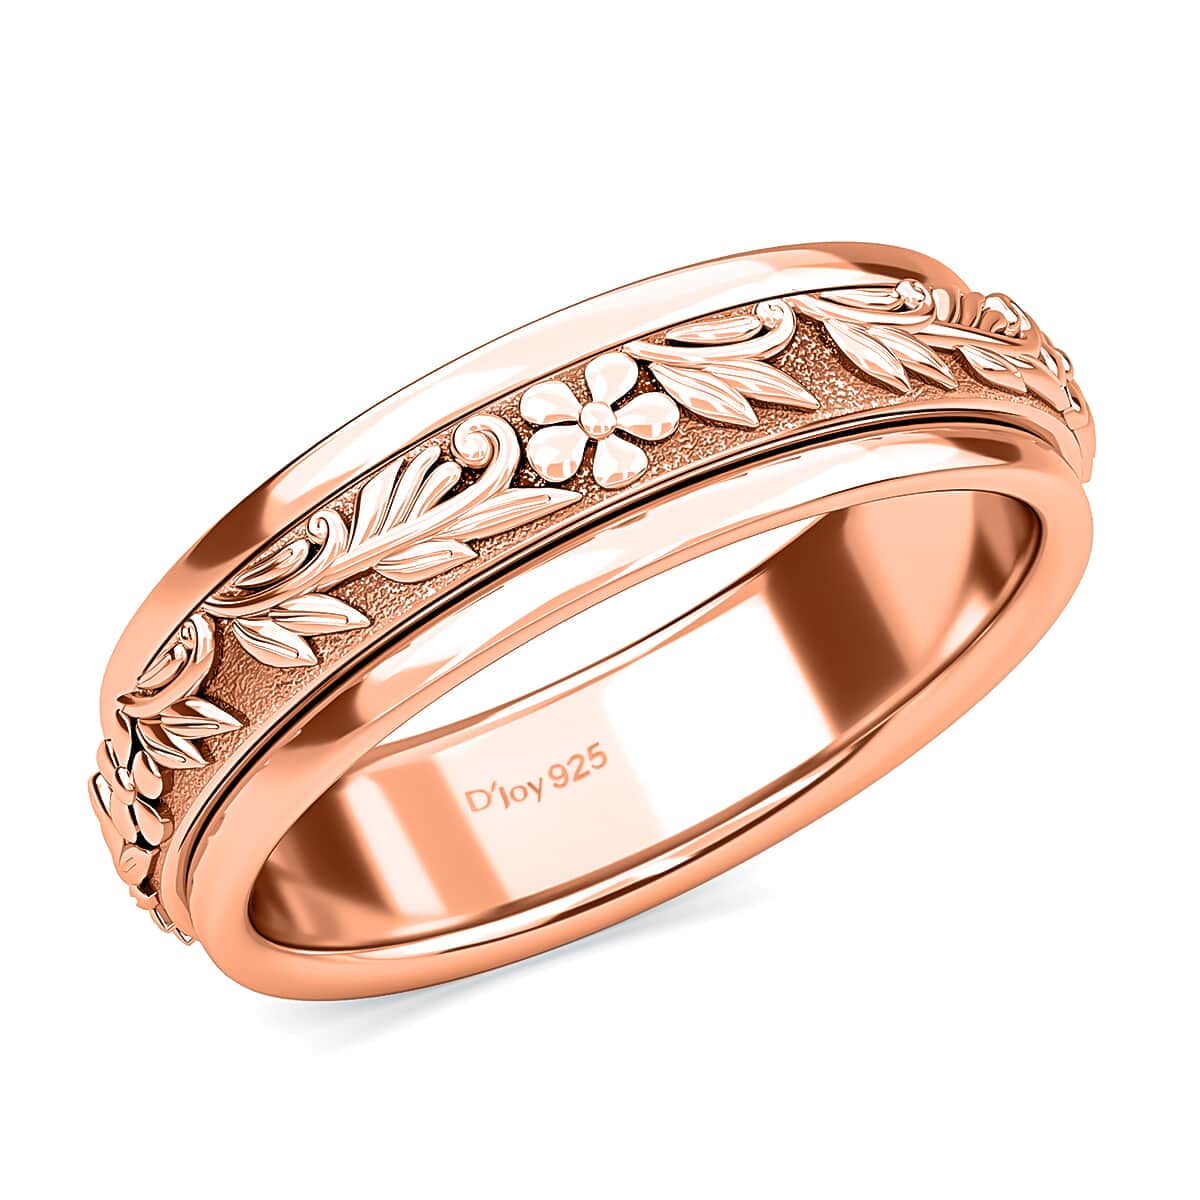 Shop LC Women 925 Silver Vermeil Rose Gold over Floral Spinner Elegant  Anxiety Ring Size 8 Birthday Gifts for Women